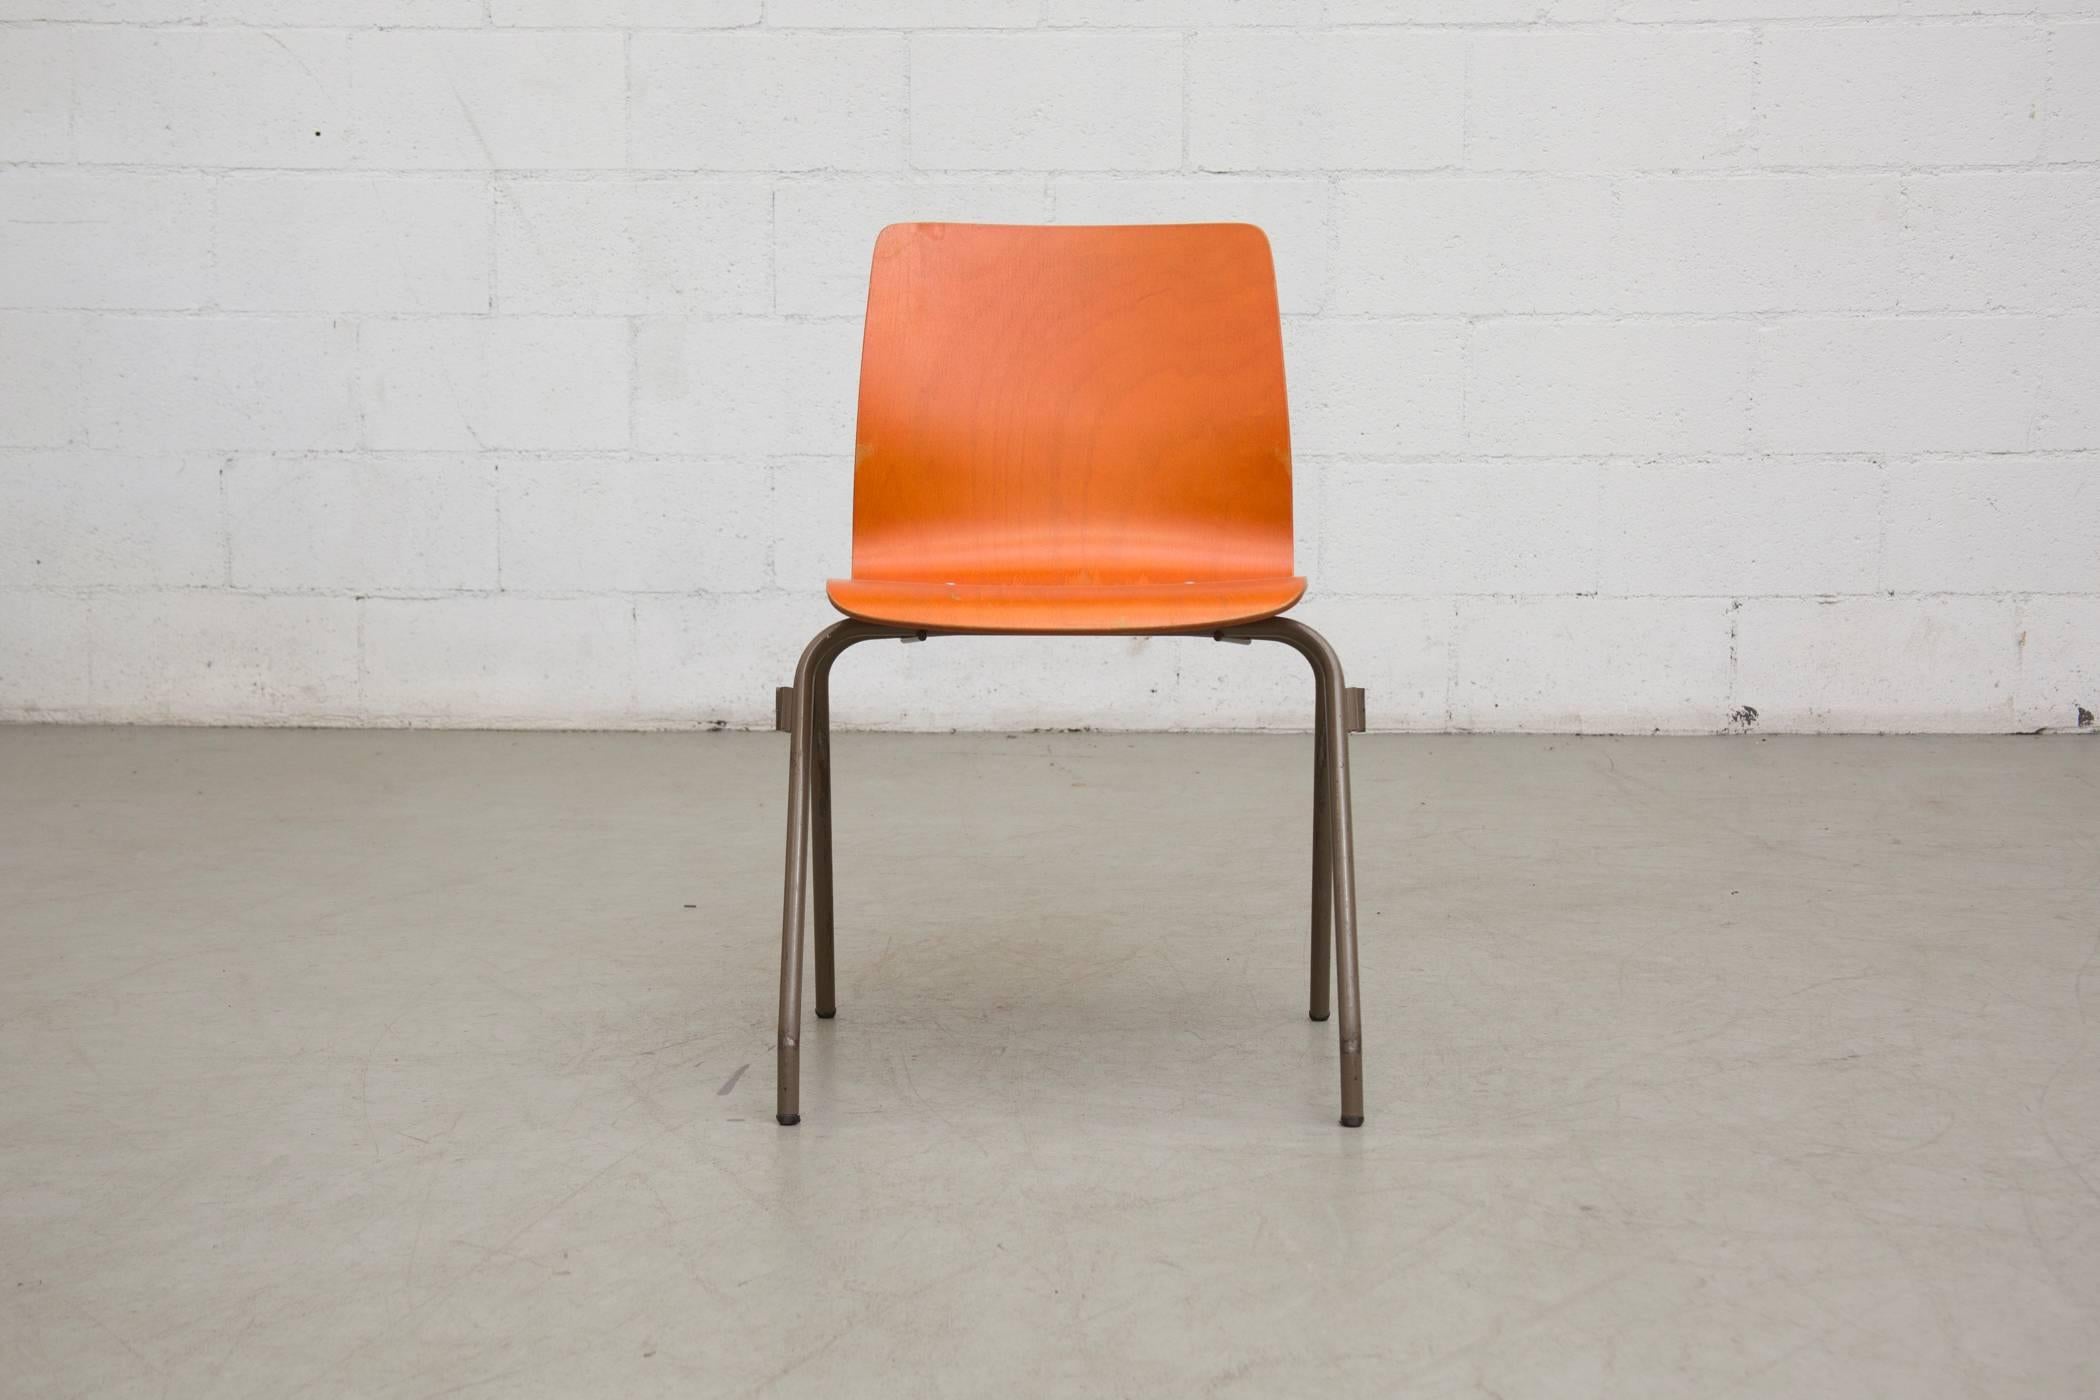 Cool orange toned plywood single shell stacking chairs on khaki enameled meal frame. Unique locking system to make rows. In original condition, visible nick marks on the seat sides due to stacking. Also 29 available in a lighter mango toned wood,